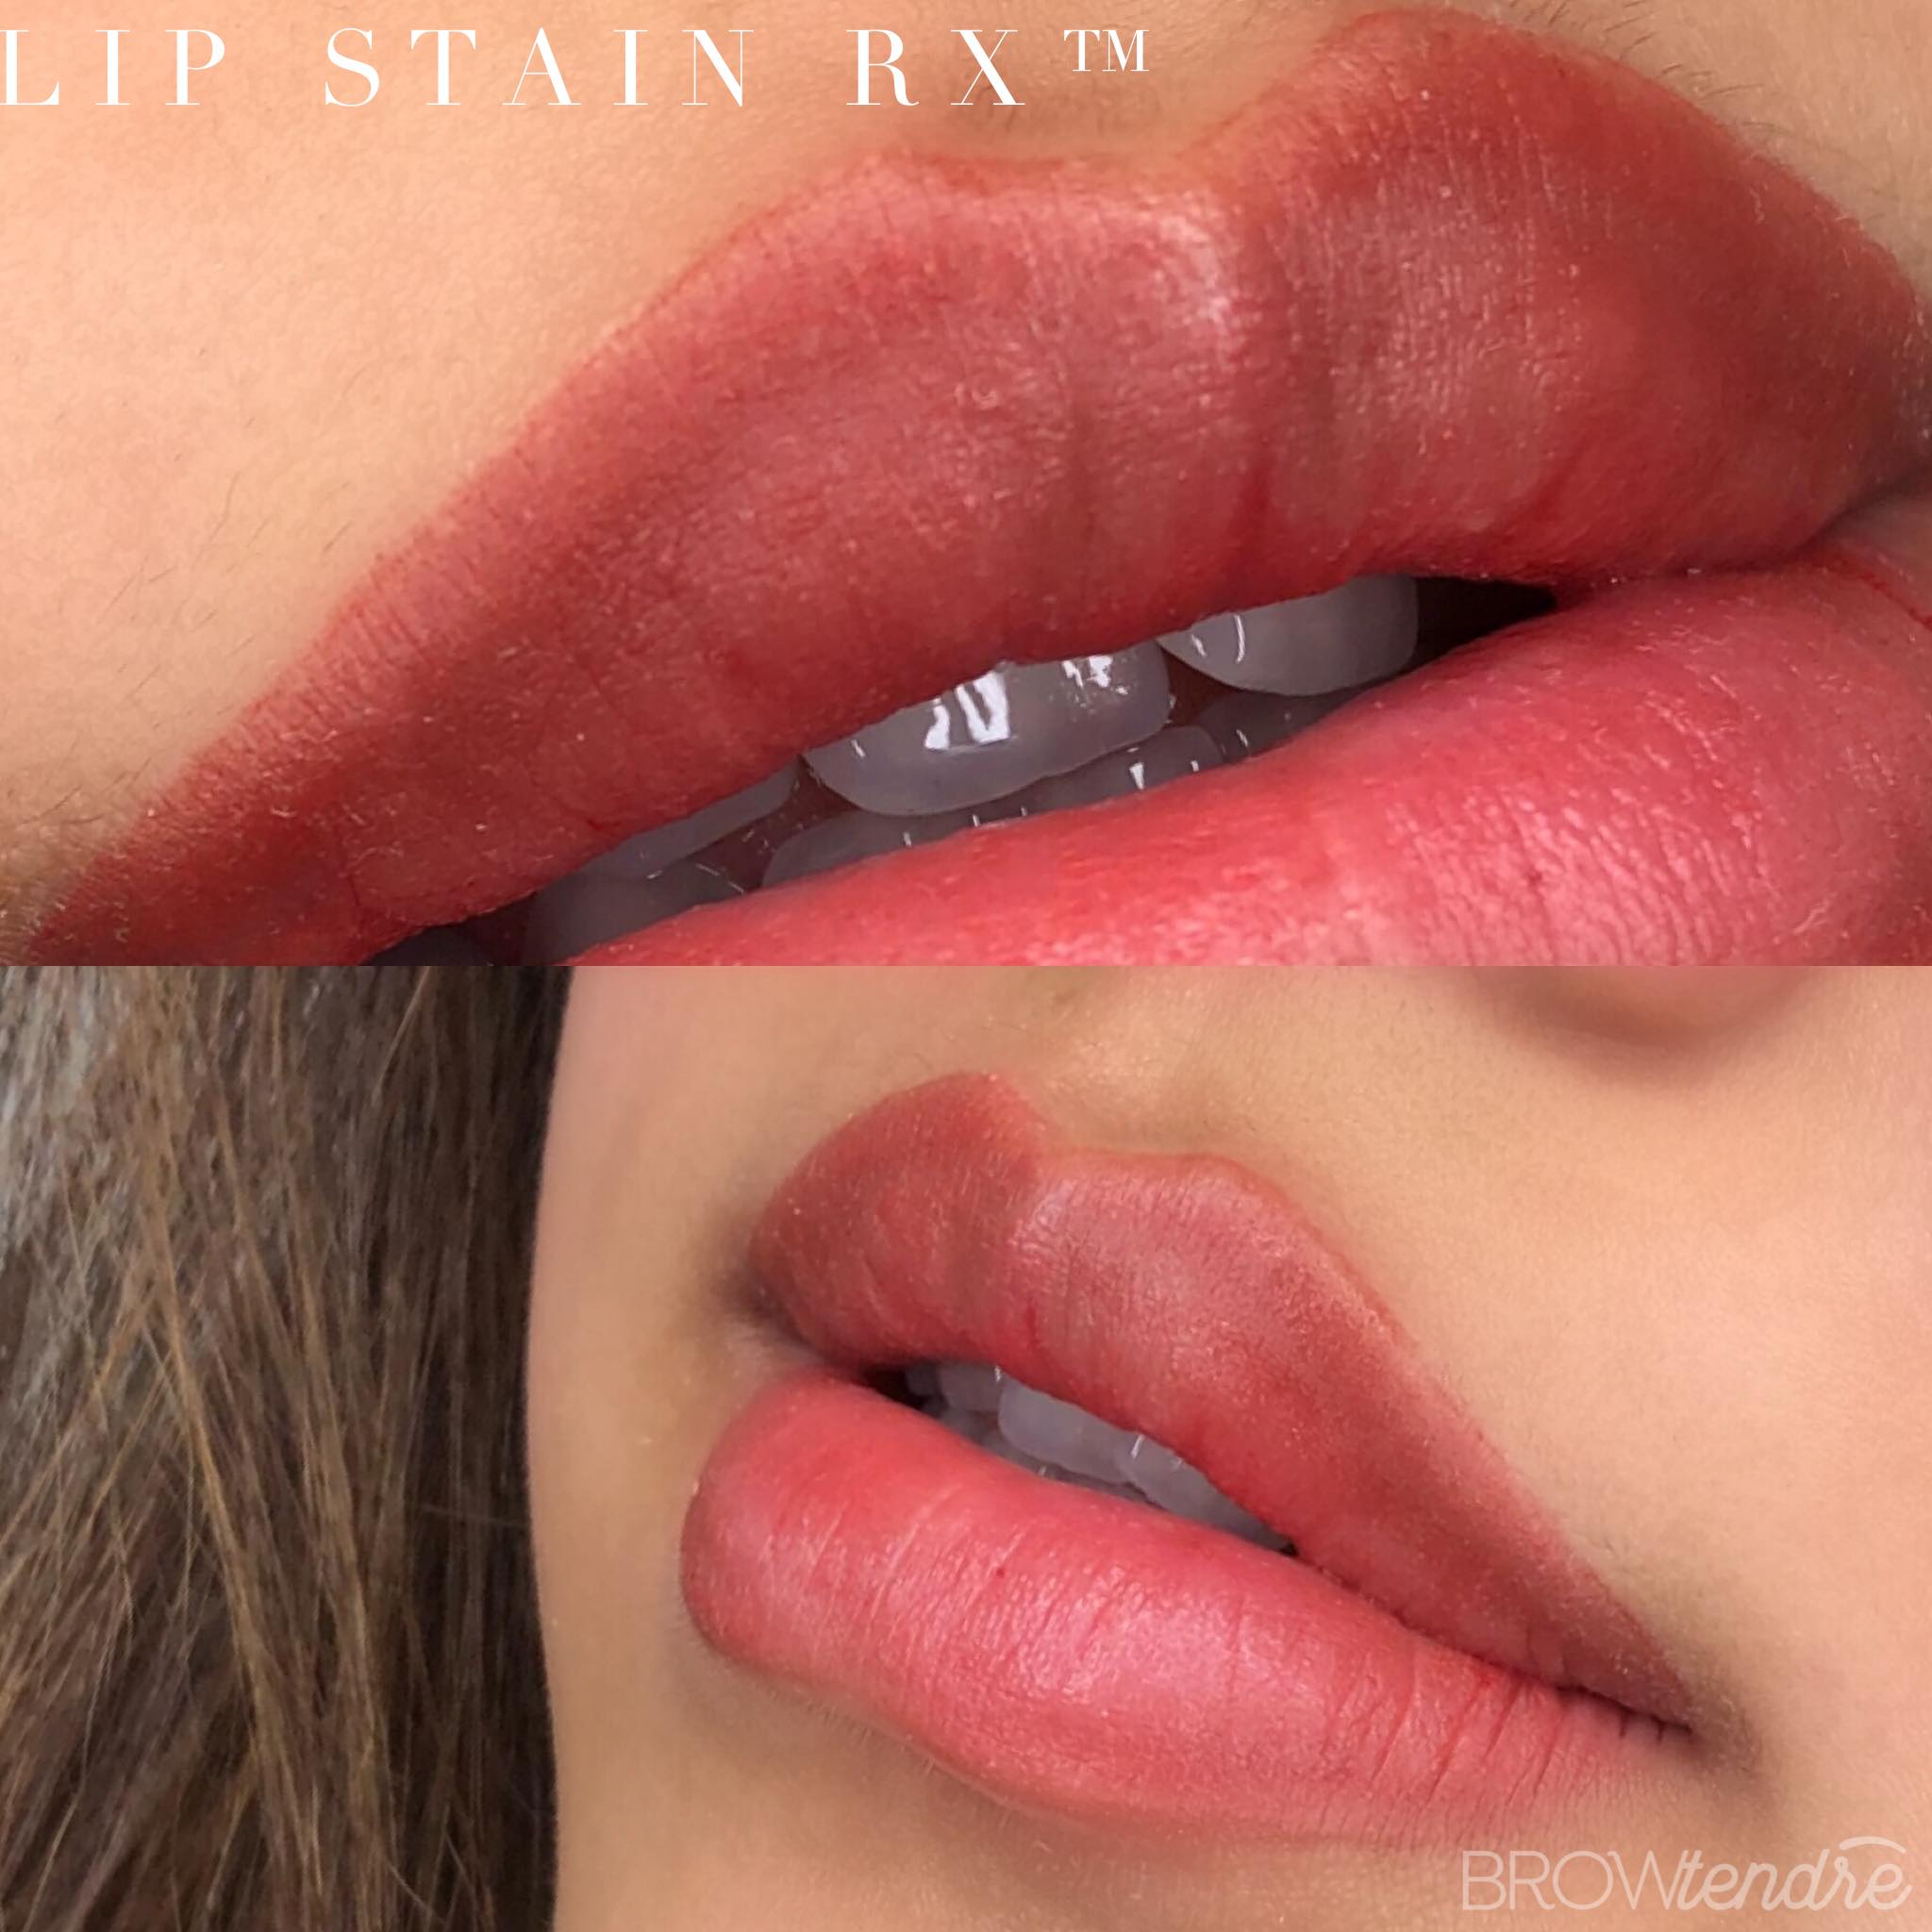 Harmony Permanent Makeup Studio - Lip Blush is a very natural looking lip  tattoo that enhances the shape and color of your lips! Color choice is  always individually chosen and based on